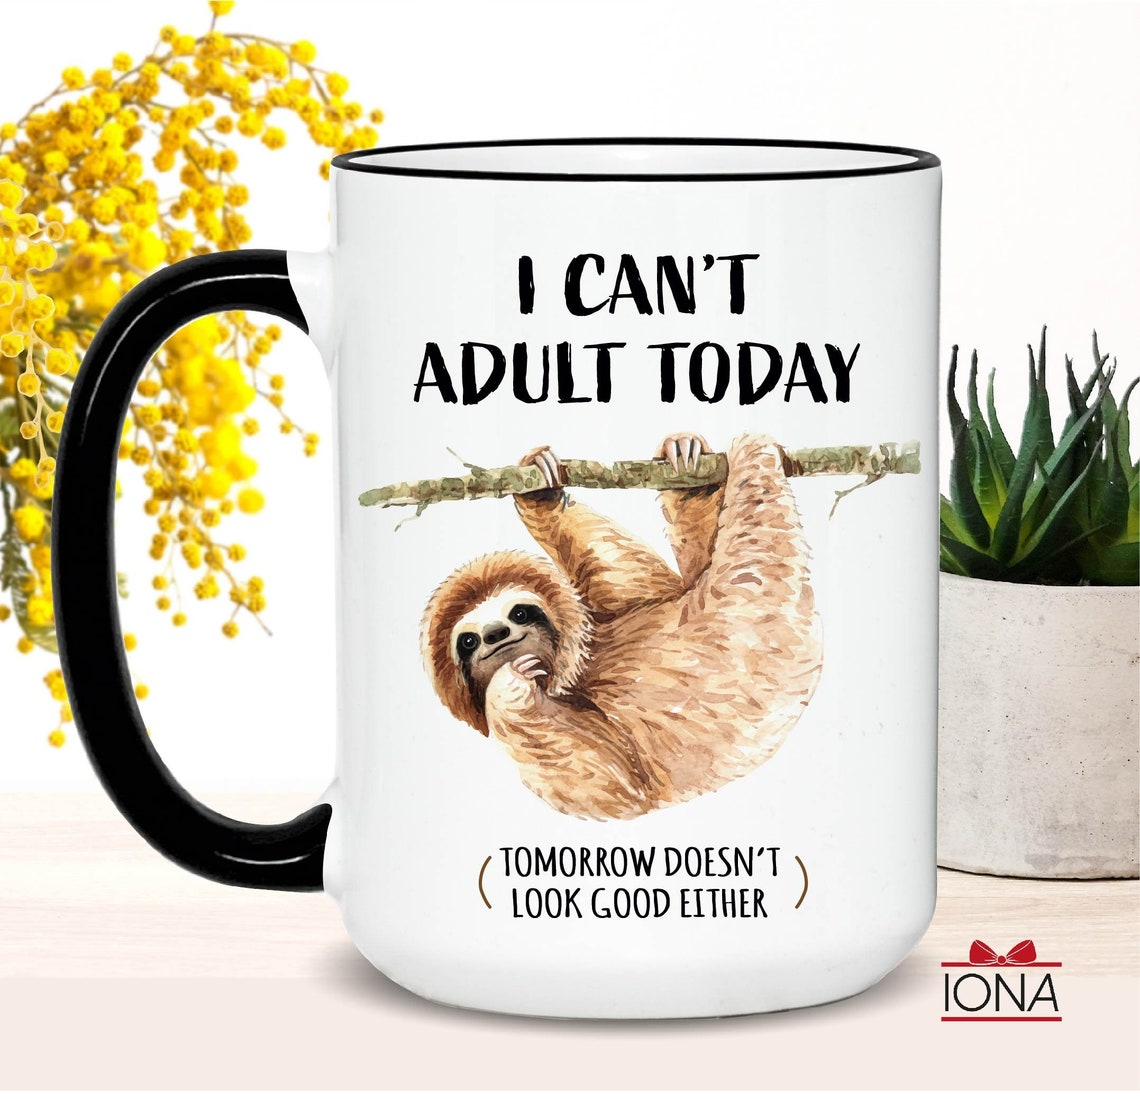 I can’t adult today Coffee Mug –Funny Sloth Gift for Women – Sloth Lover Gift – Spirit animal Tea Cup